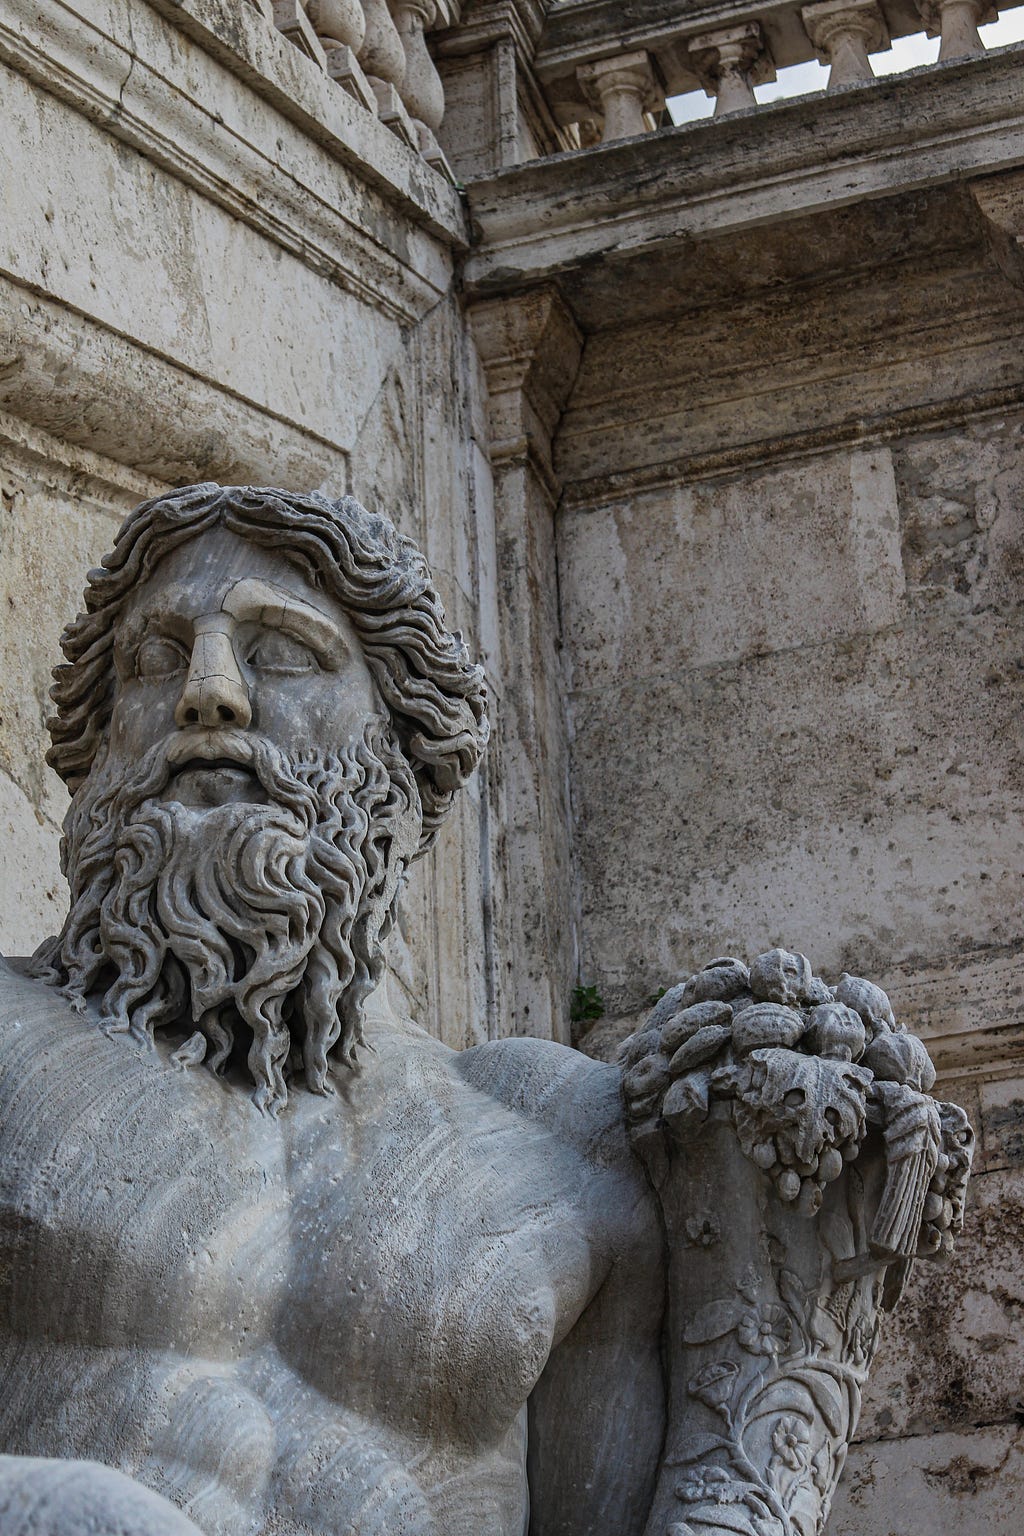 A close up of an ancient statue of Hercules.